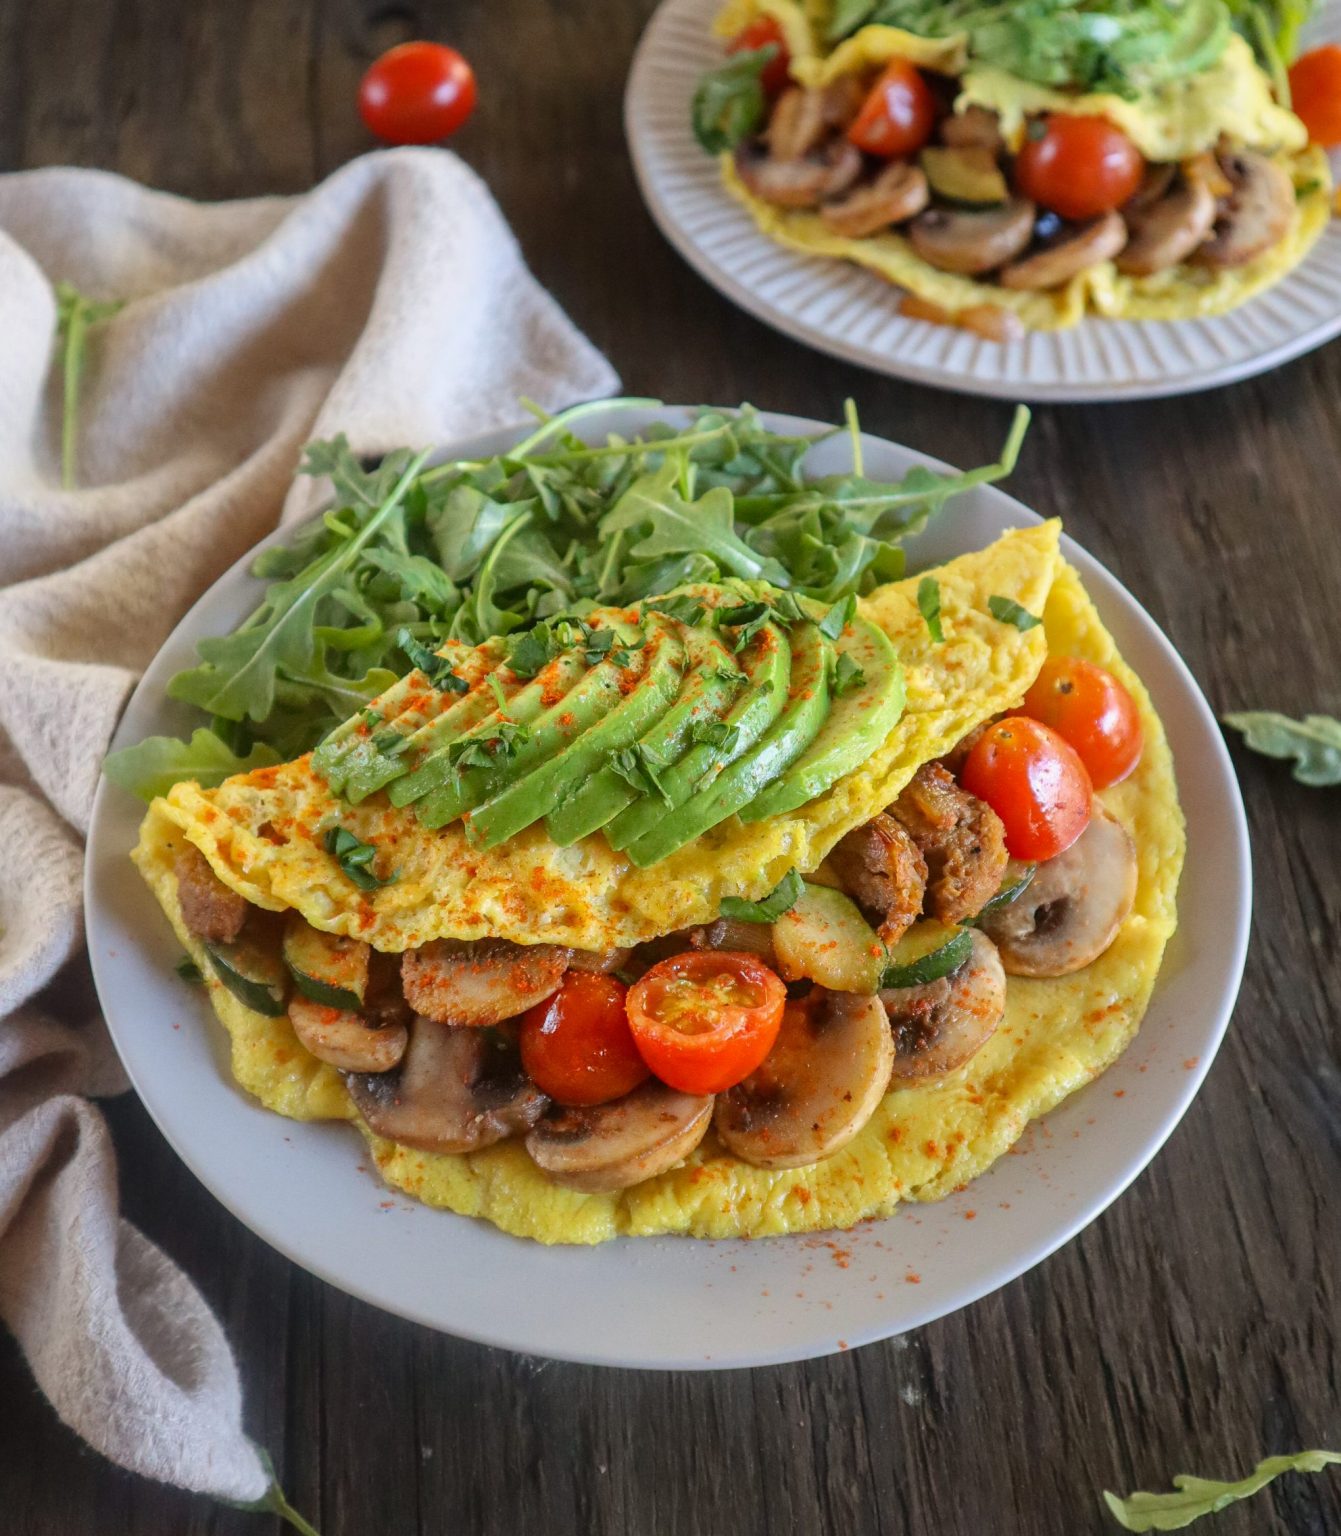 Vegan Omelette without Chickpea Flour (super easy!)